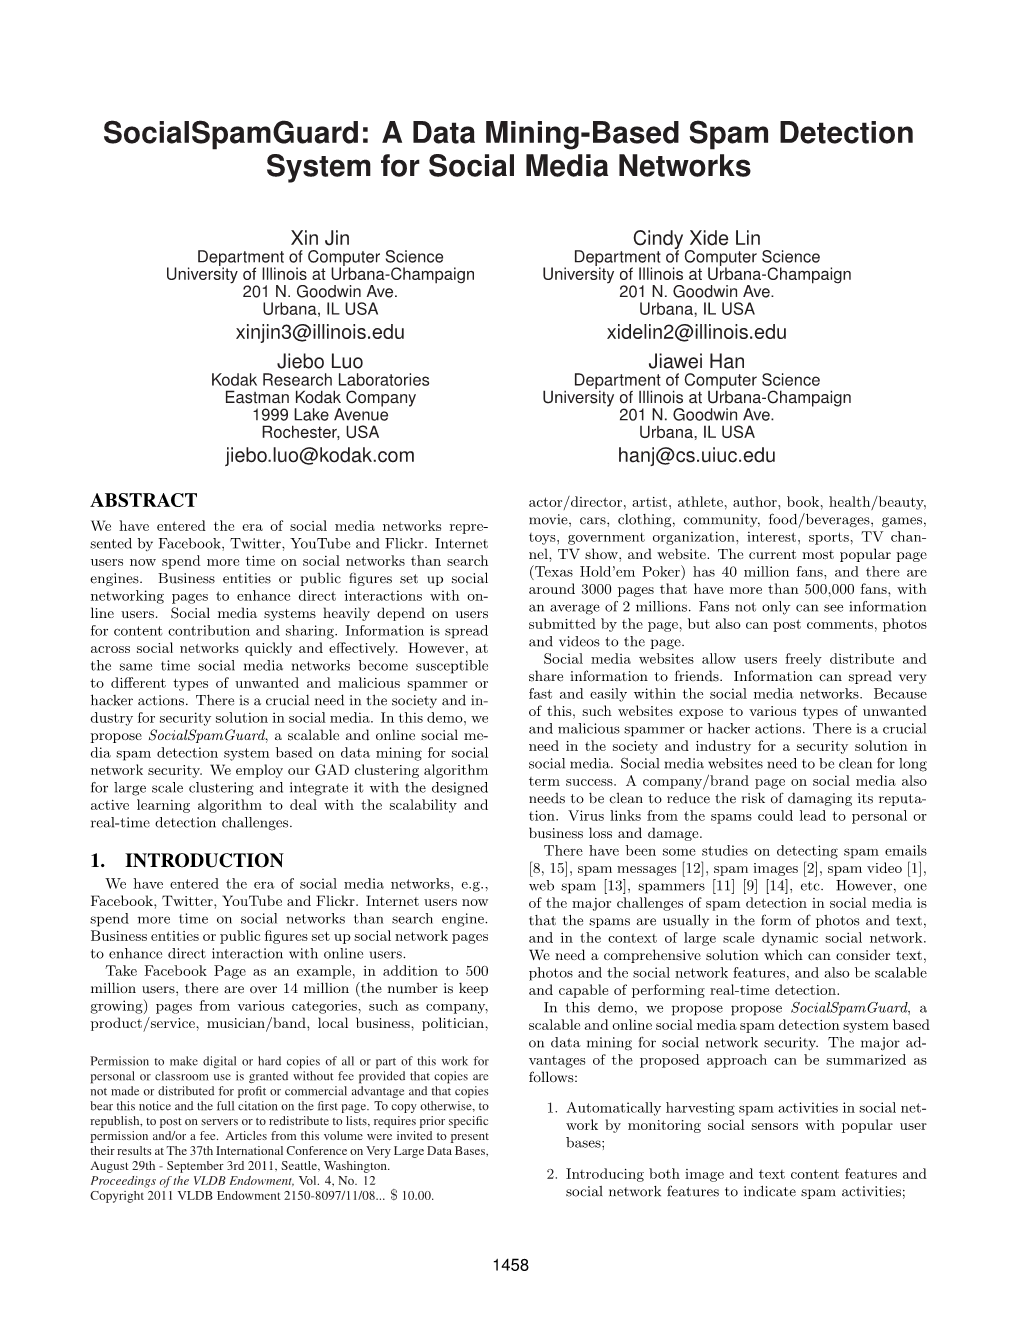 A Data Mining-Based Spam Detection System for Social Media Networks